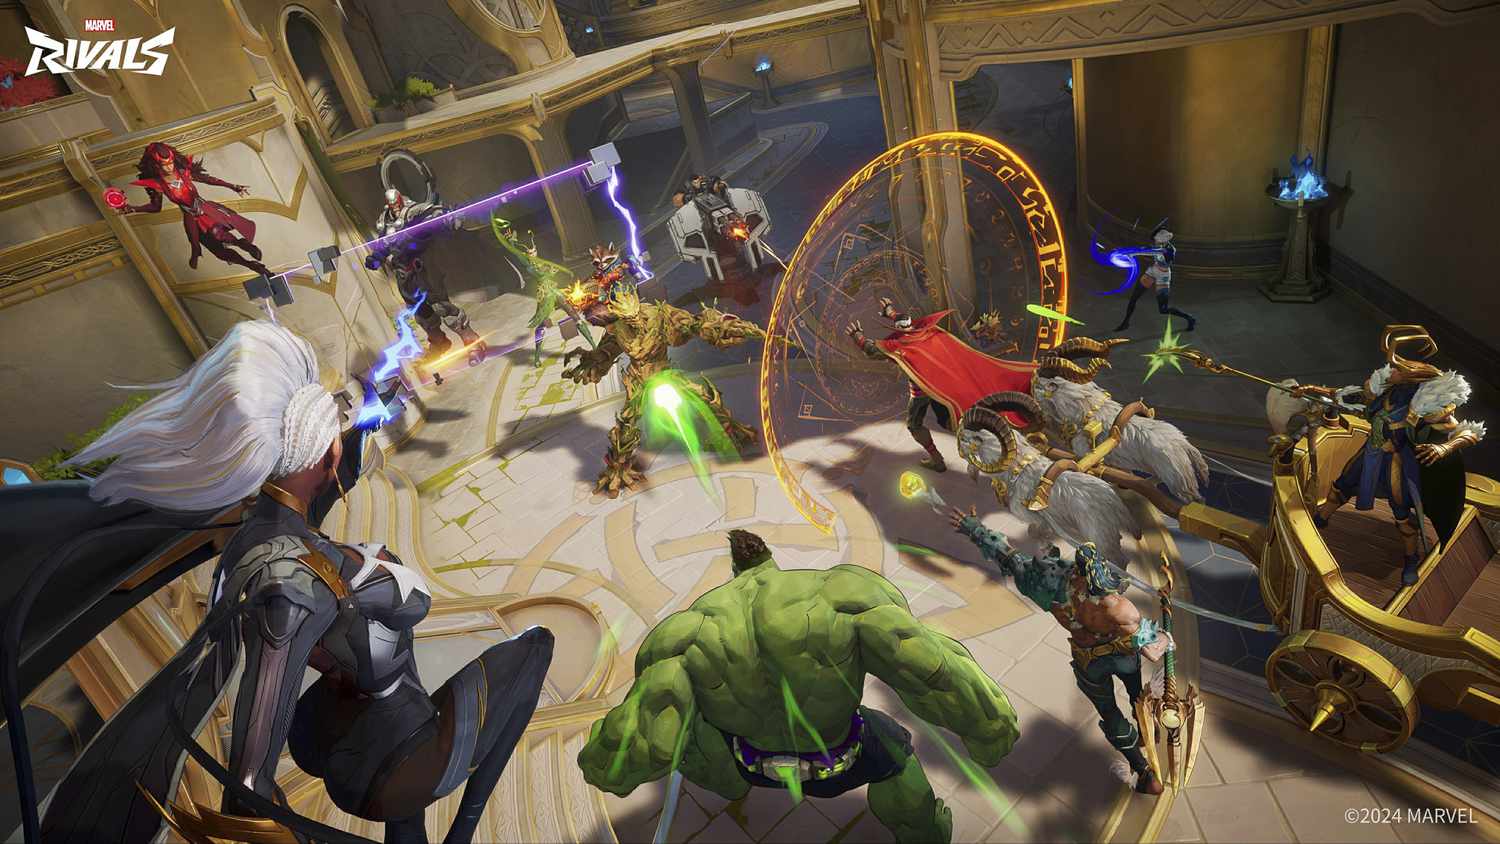 Marvel Rivals: The New Overwatch-Style Hero Shooter – Is a New Esports Title on the Horizon?